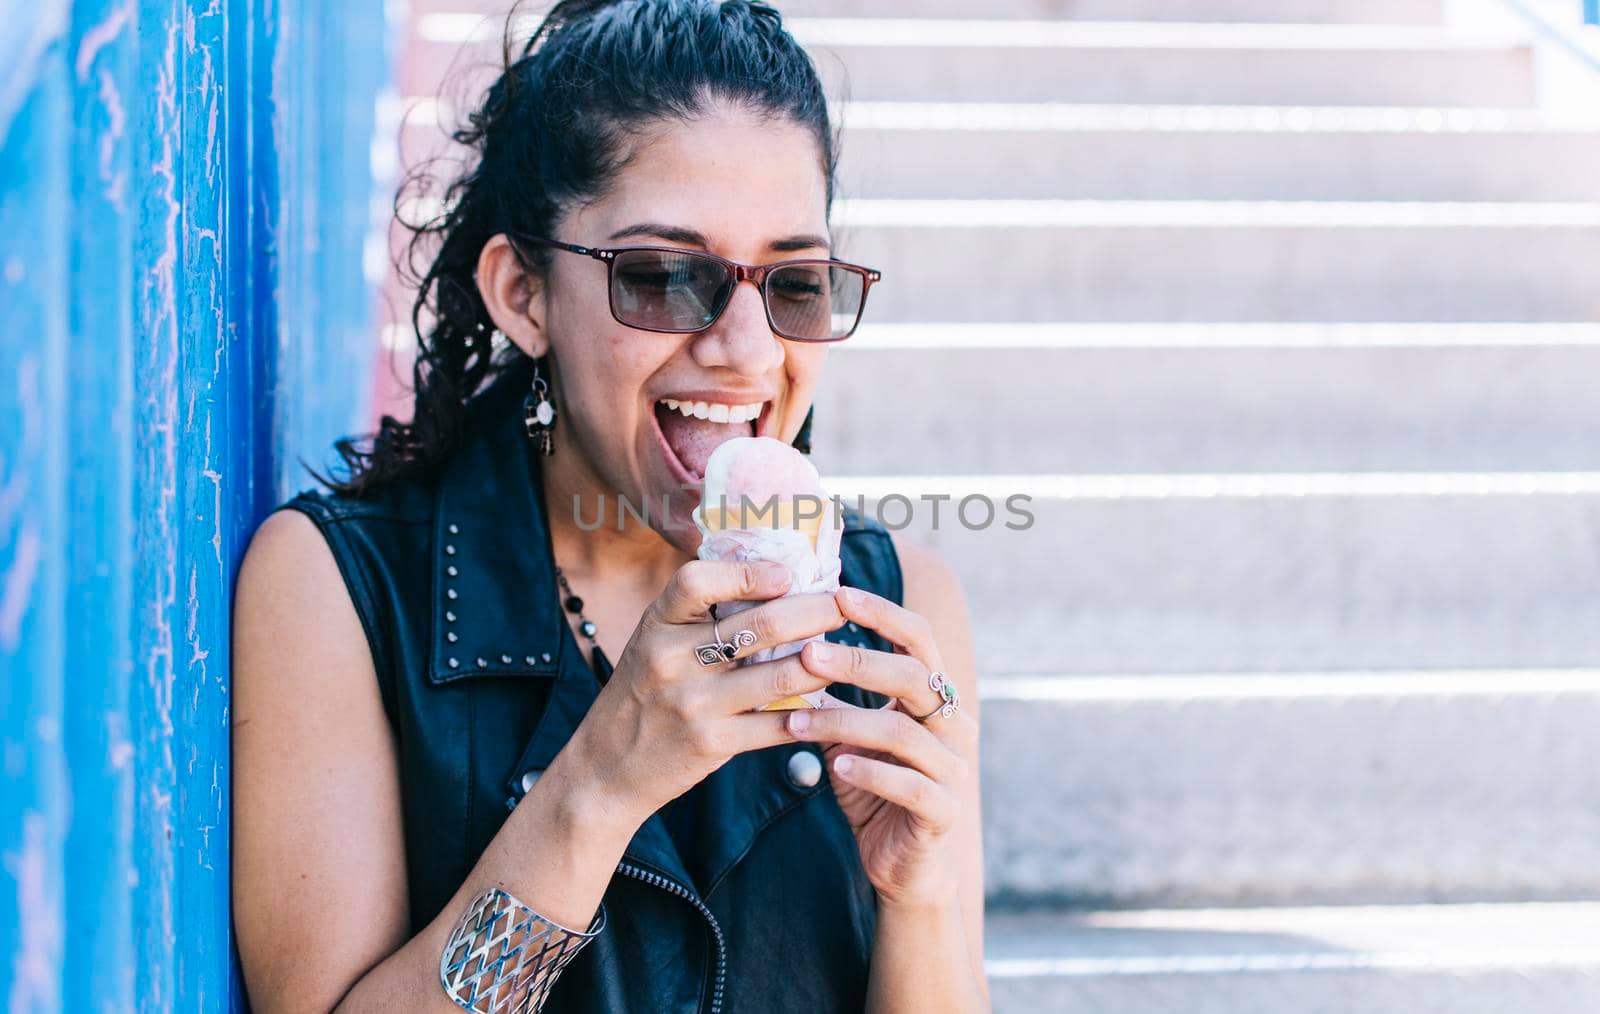 Urban girl eating an ice cream cone, A girl eating an ice cream outdoors, girl enjoying an ice cream, close up of a woman holding an ice cream by isaiphoto